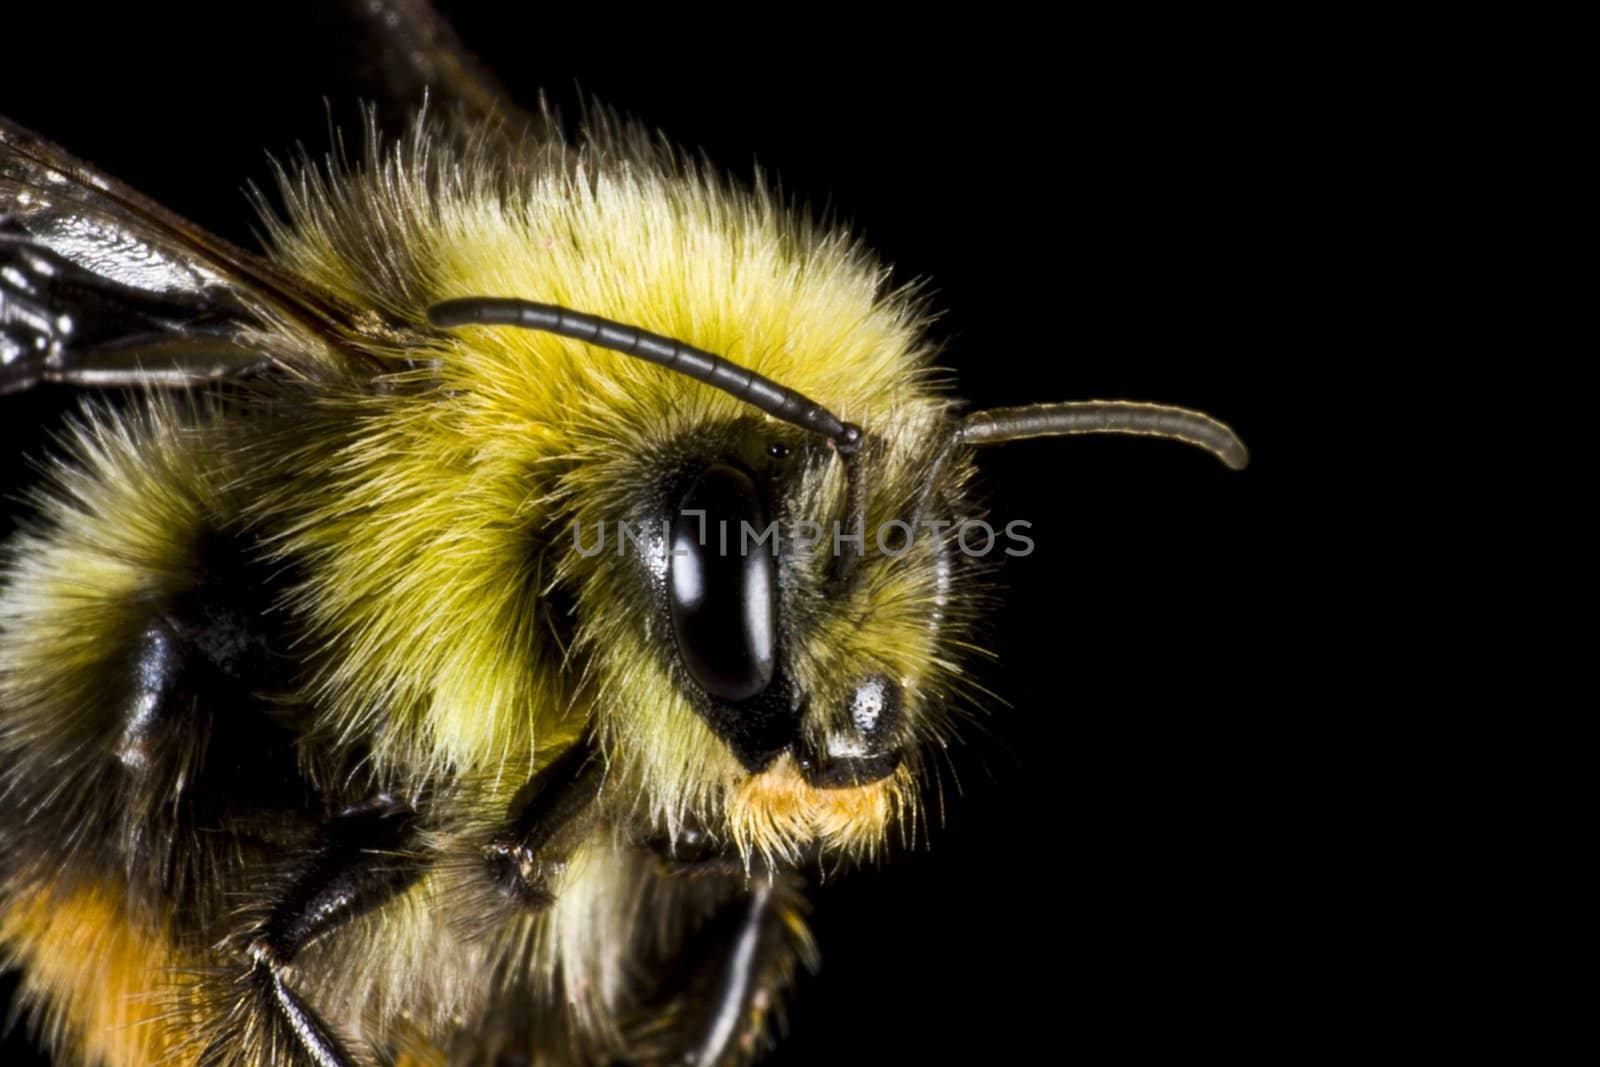 bumblebee in close up by gewoldi